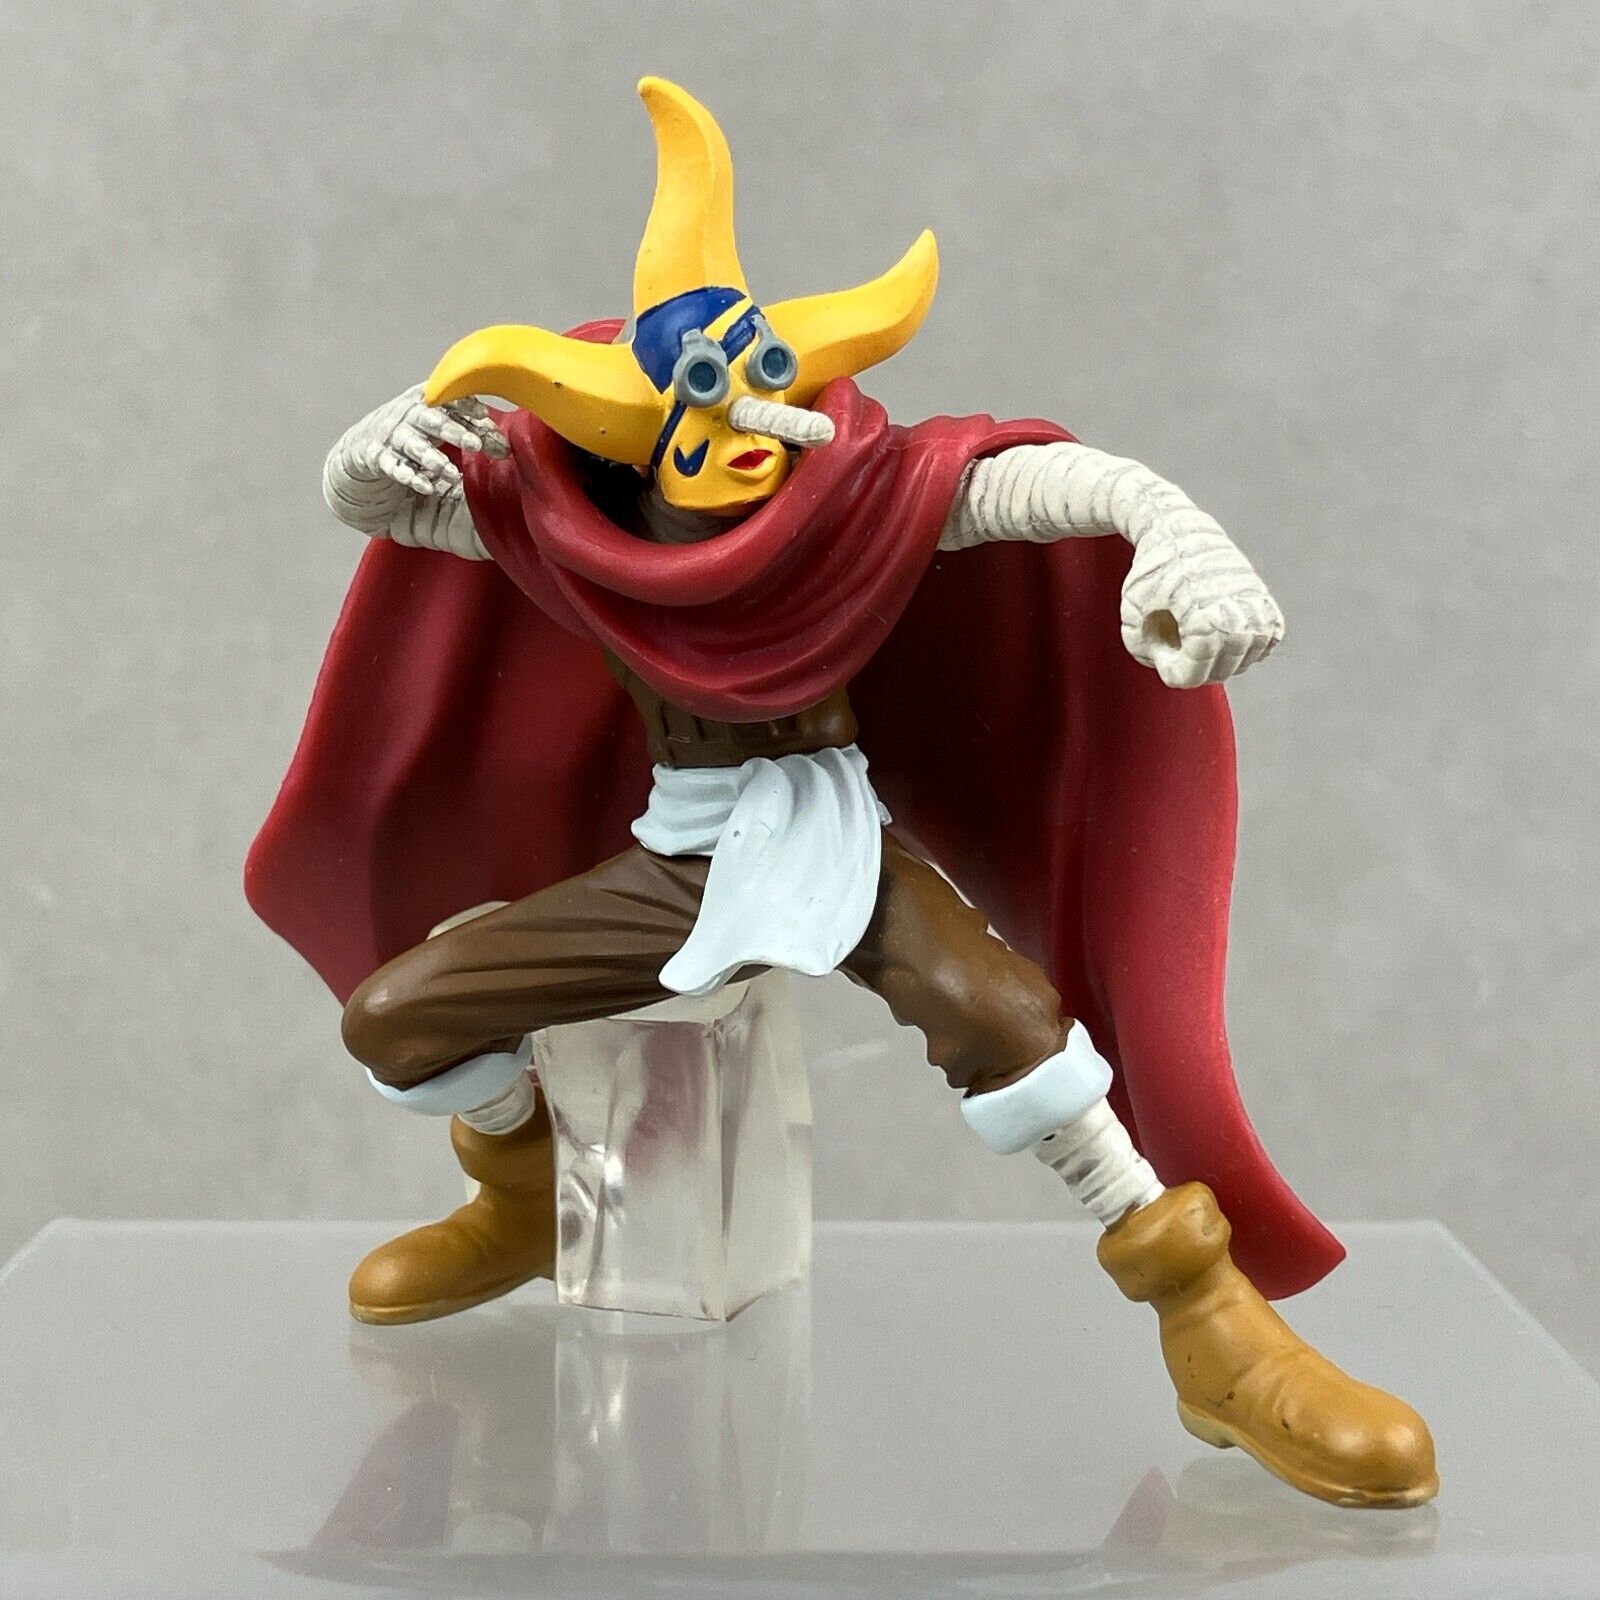 Bandai One Piece Sniper King Usopp Attack Motions 4 Anime Figure Japan Import